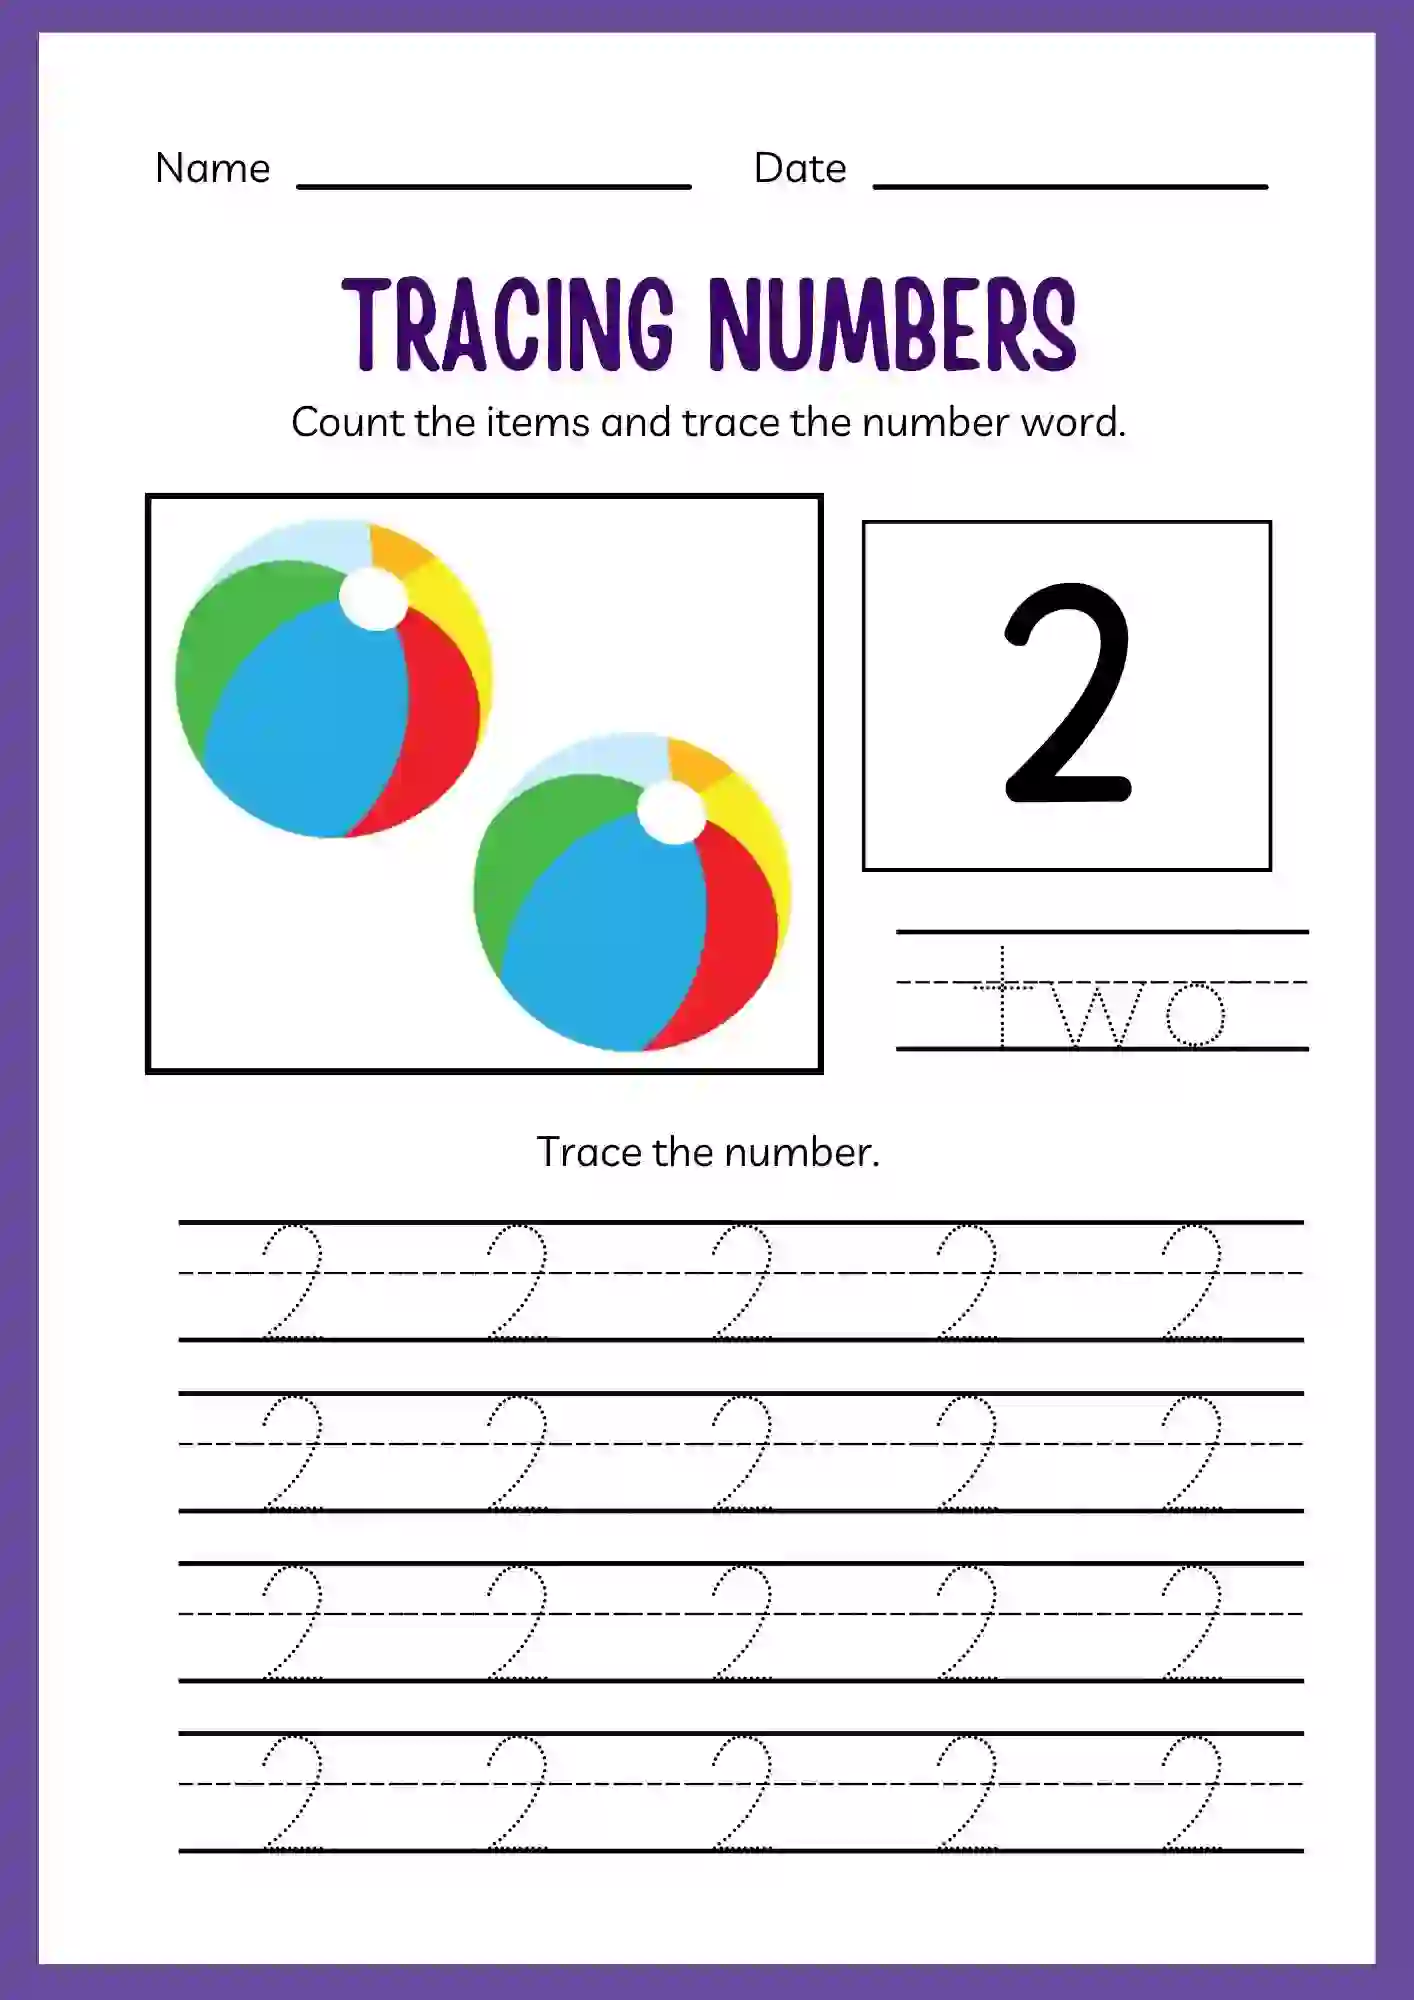 Number Tracing Worksheets 1 to 20 (Number 2 tracing sheet)